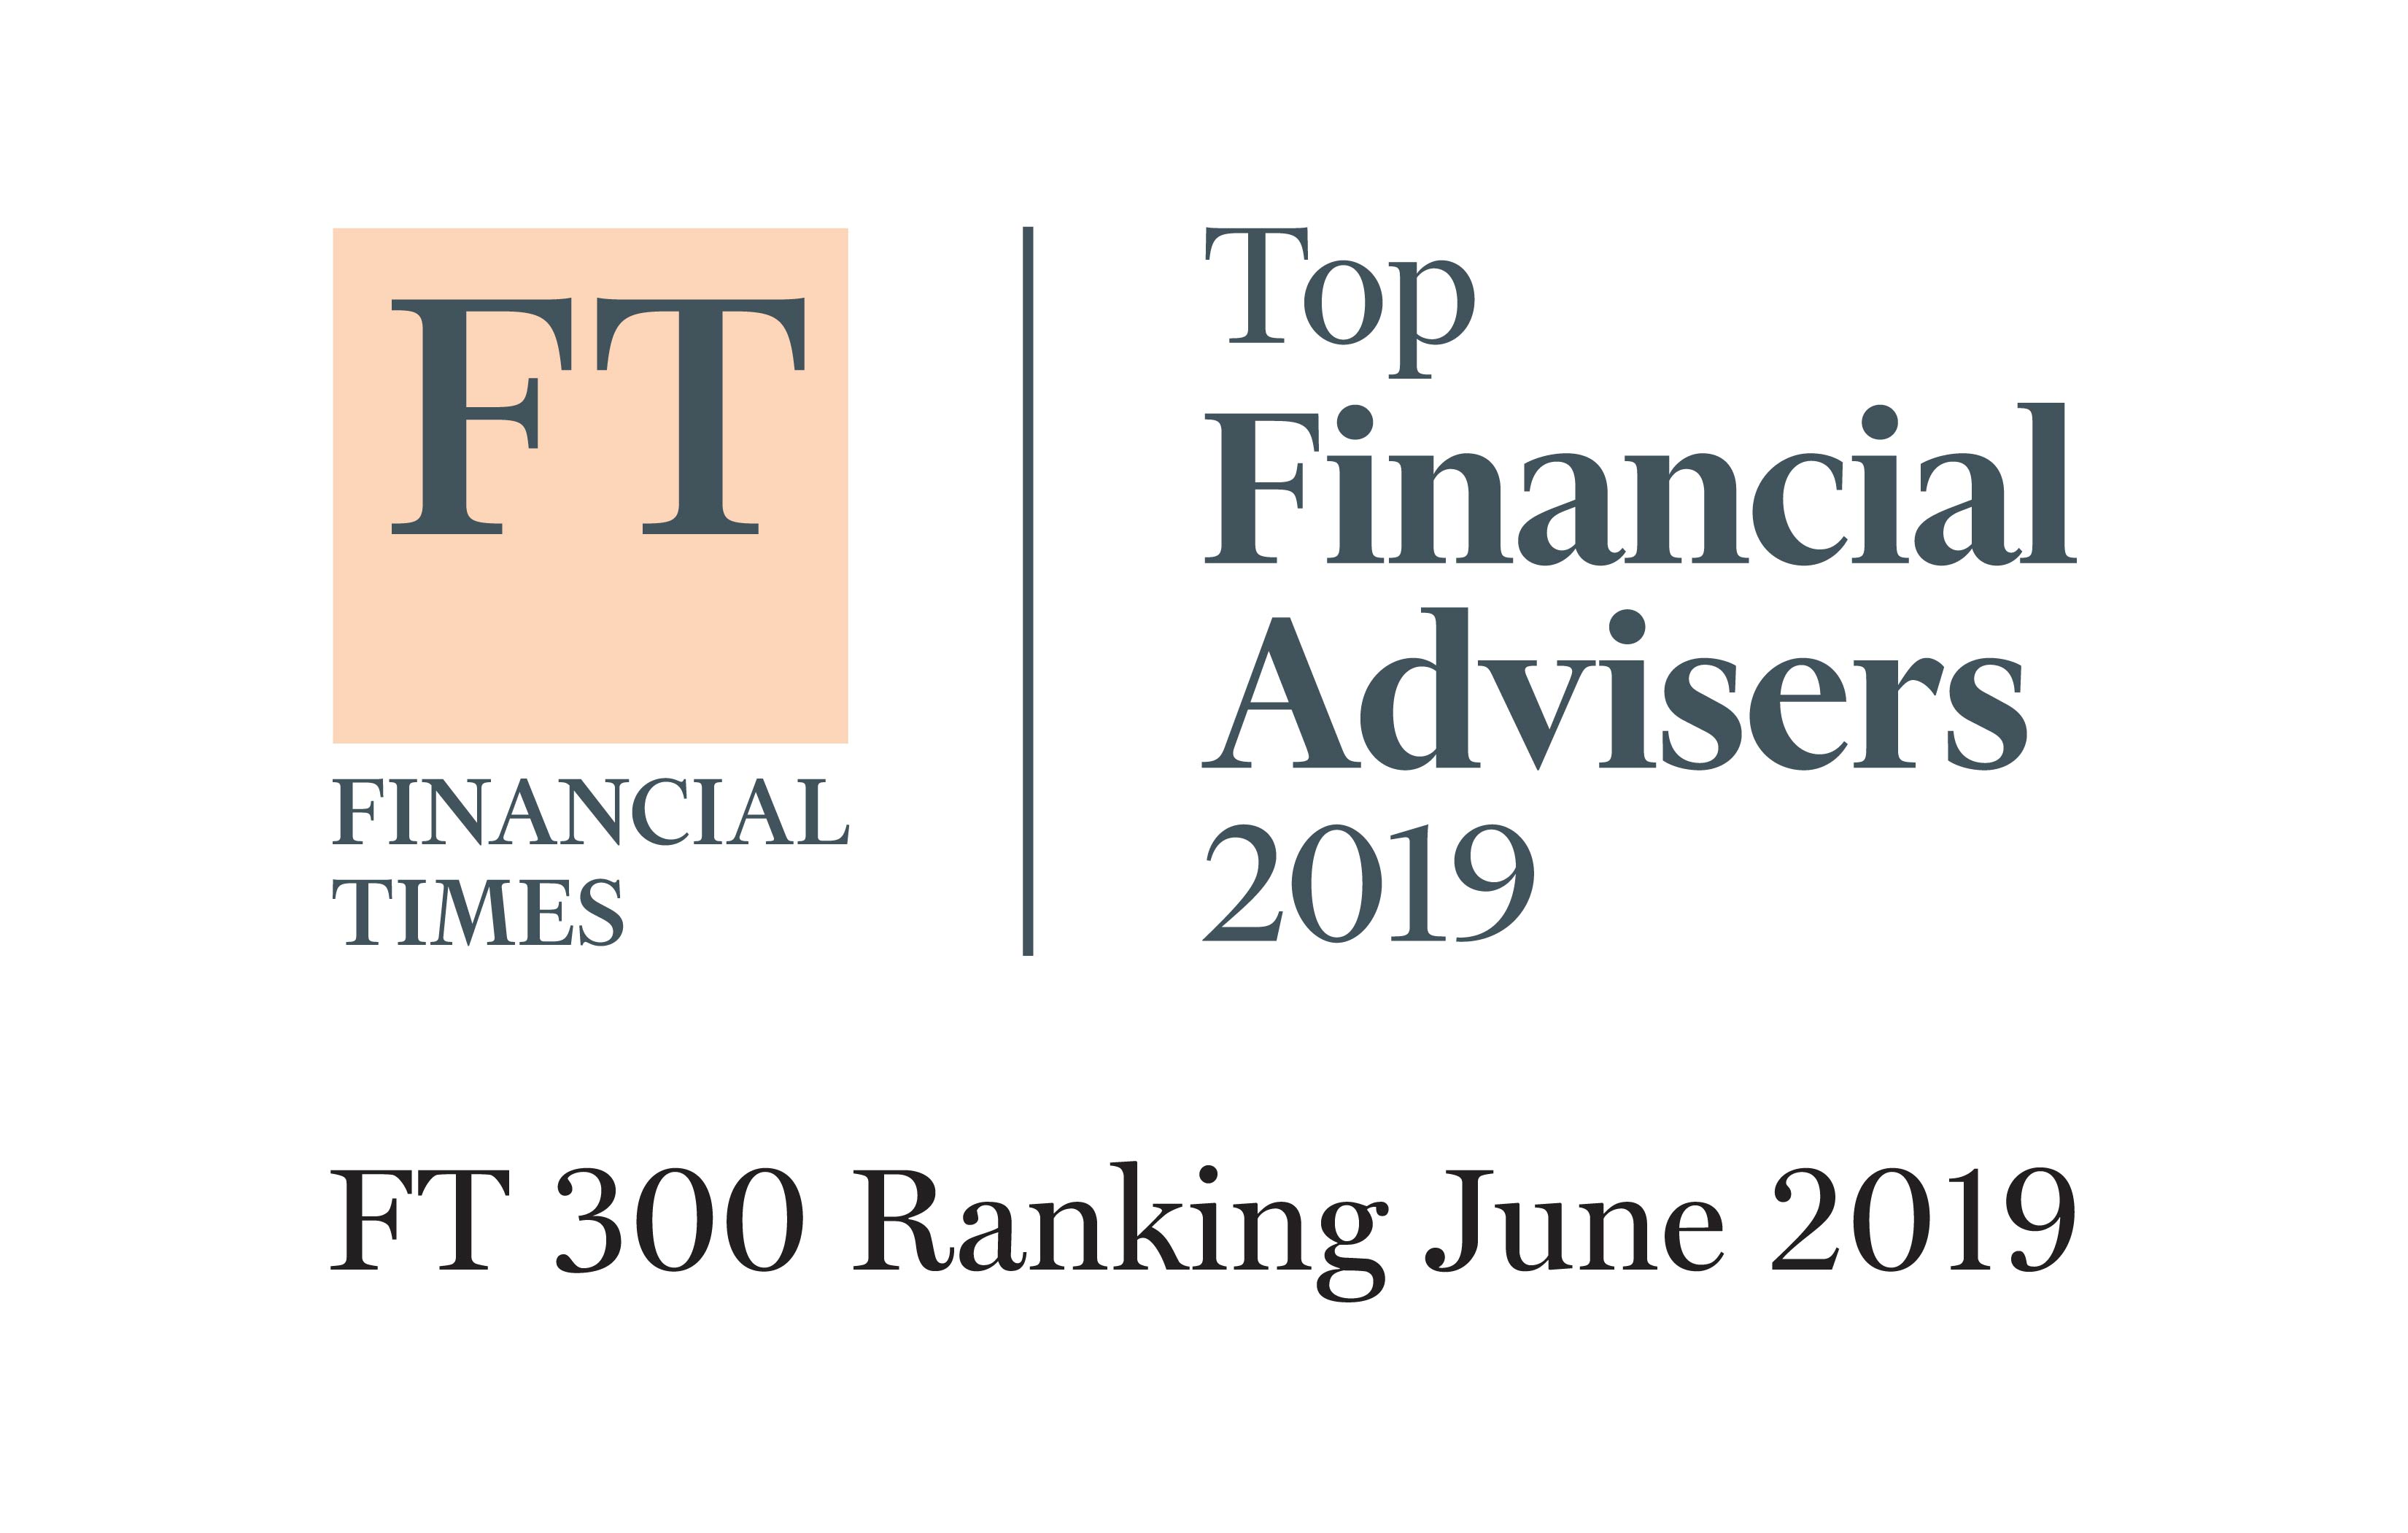 FT 300 Top Financial Advisers 2019